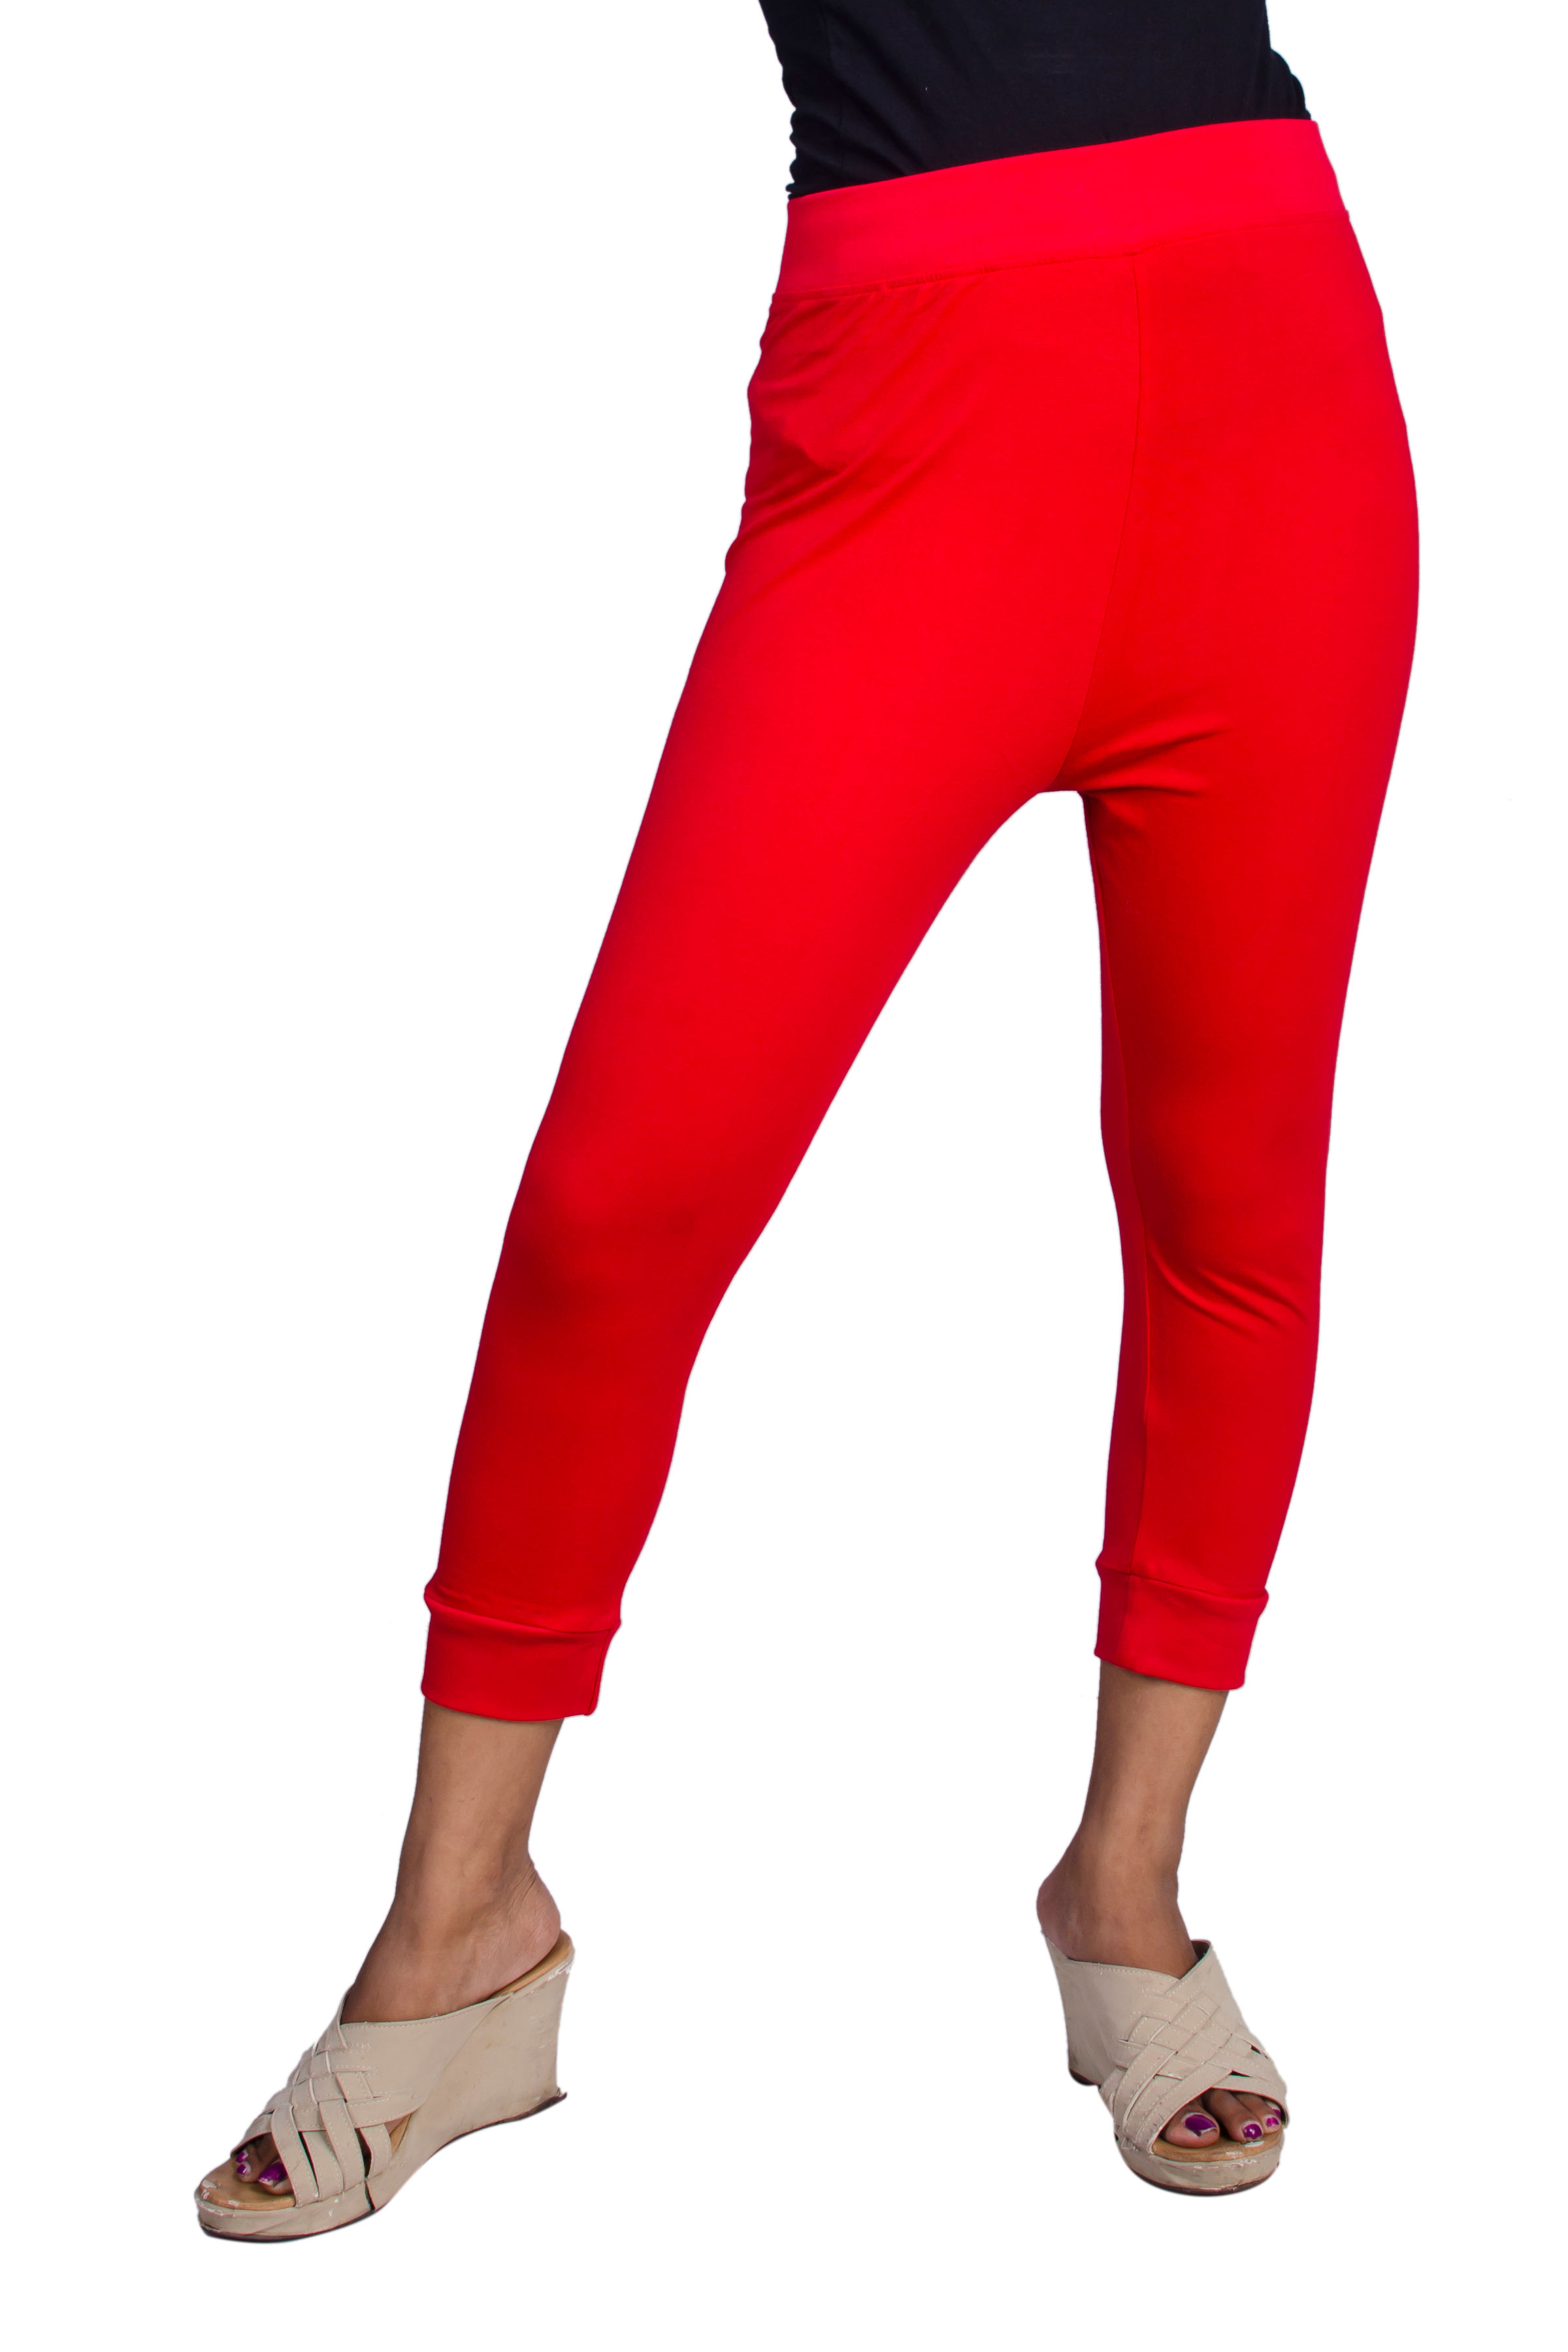 Best Bootcut Yoga Pants With Pocket